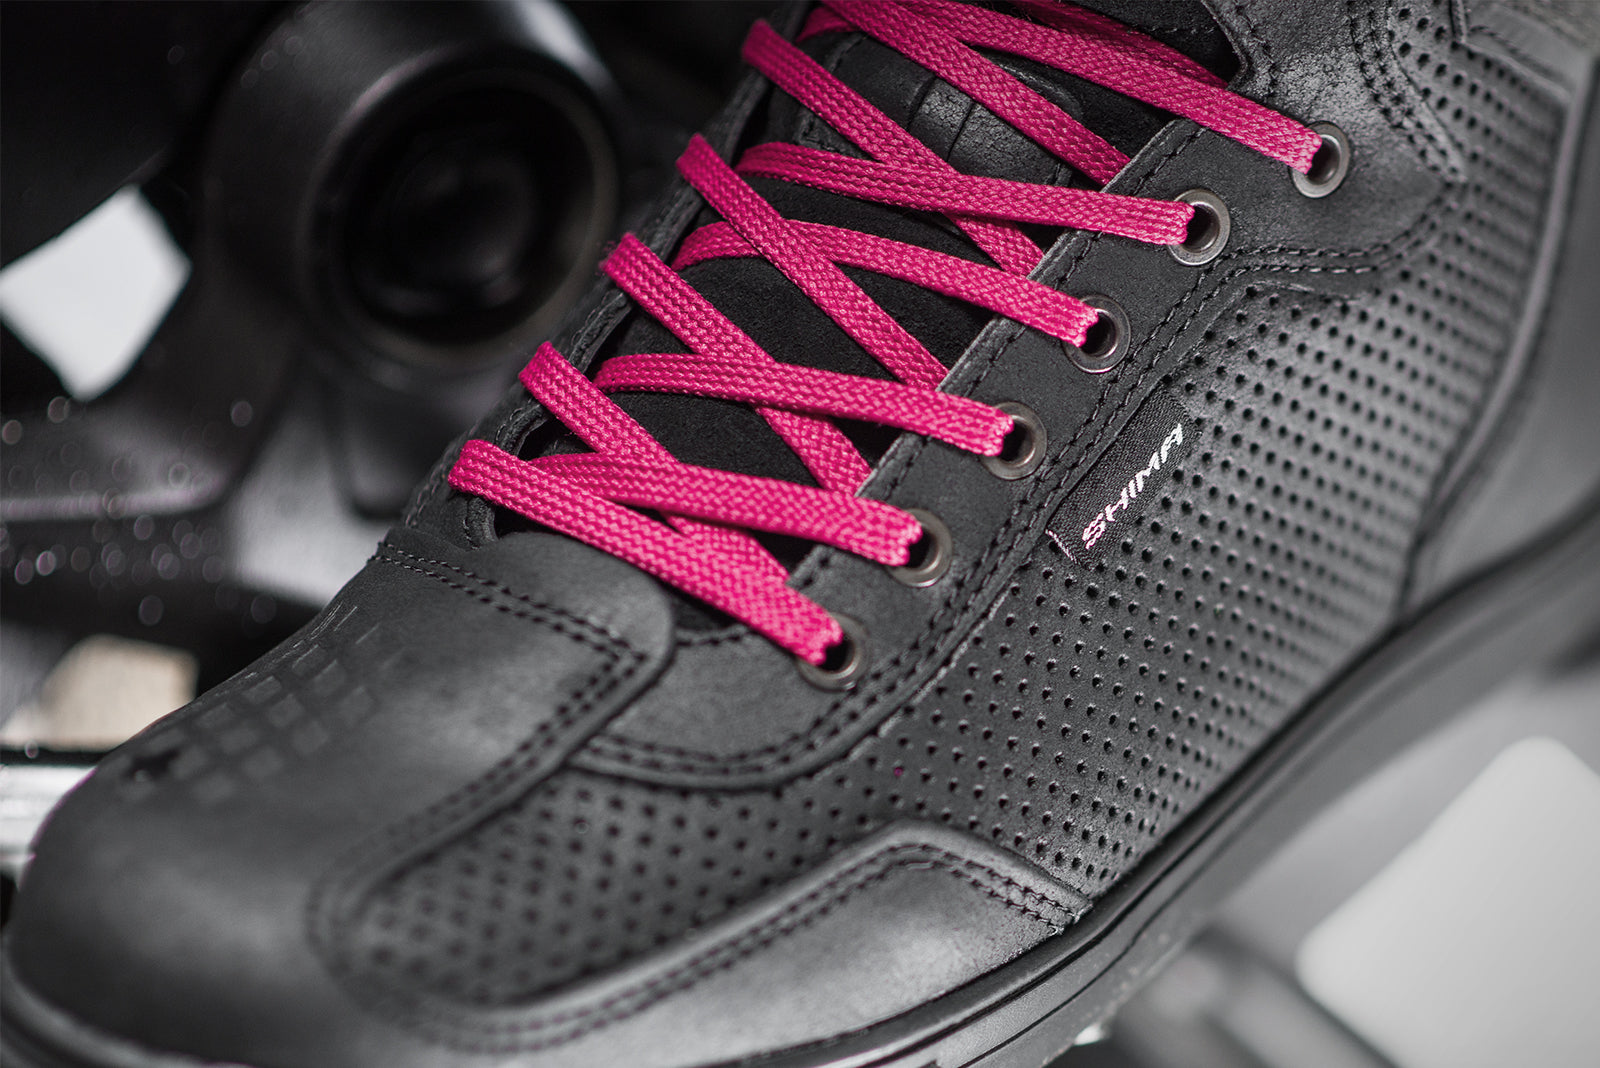 Rebel waterproof motorcycle sneakers with pink laces from Shima close up